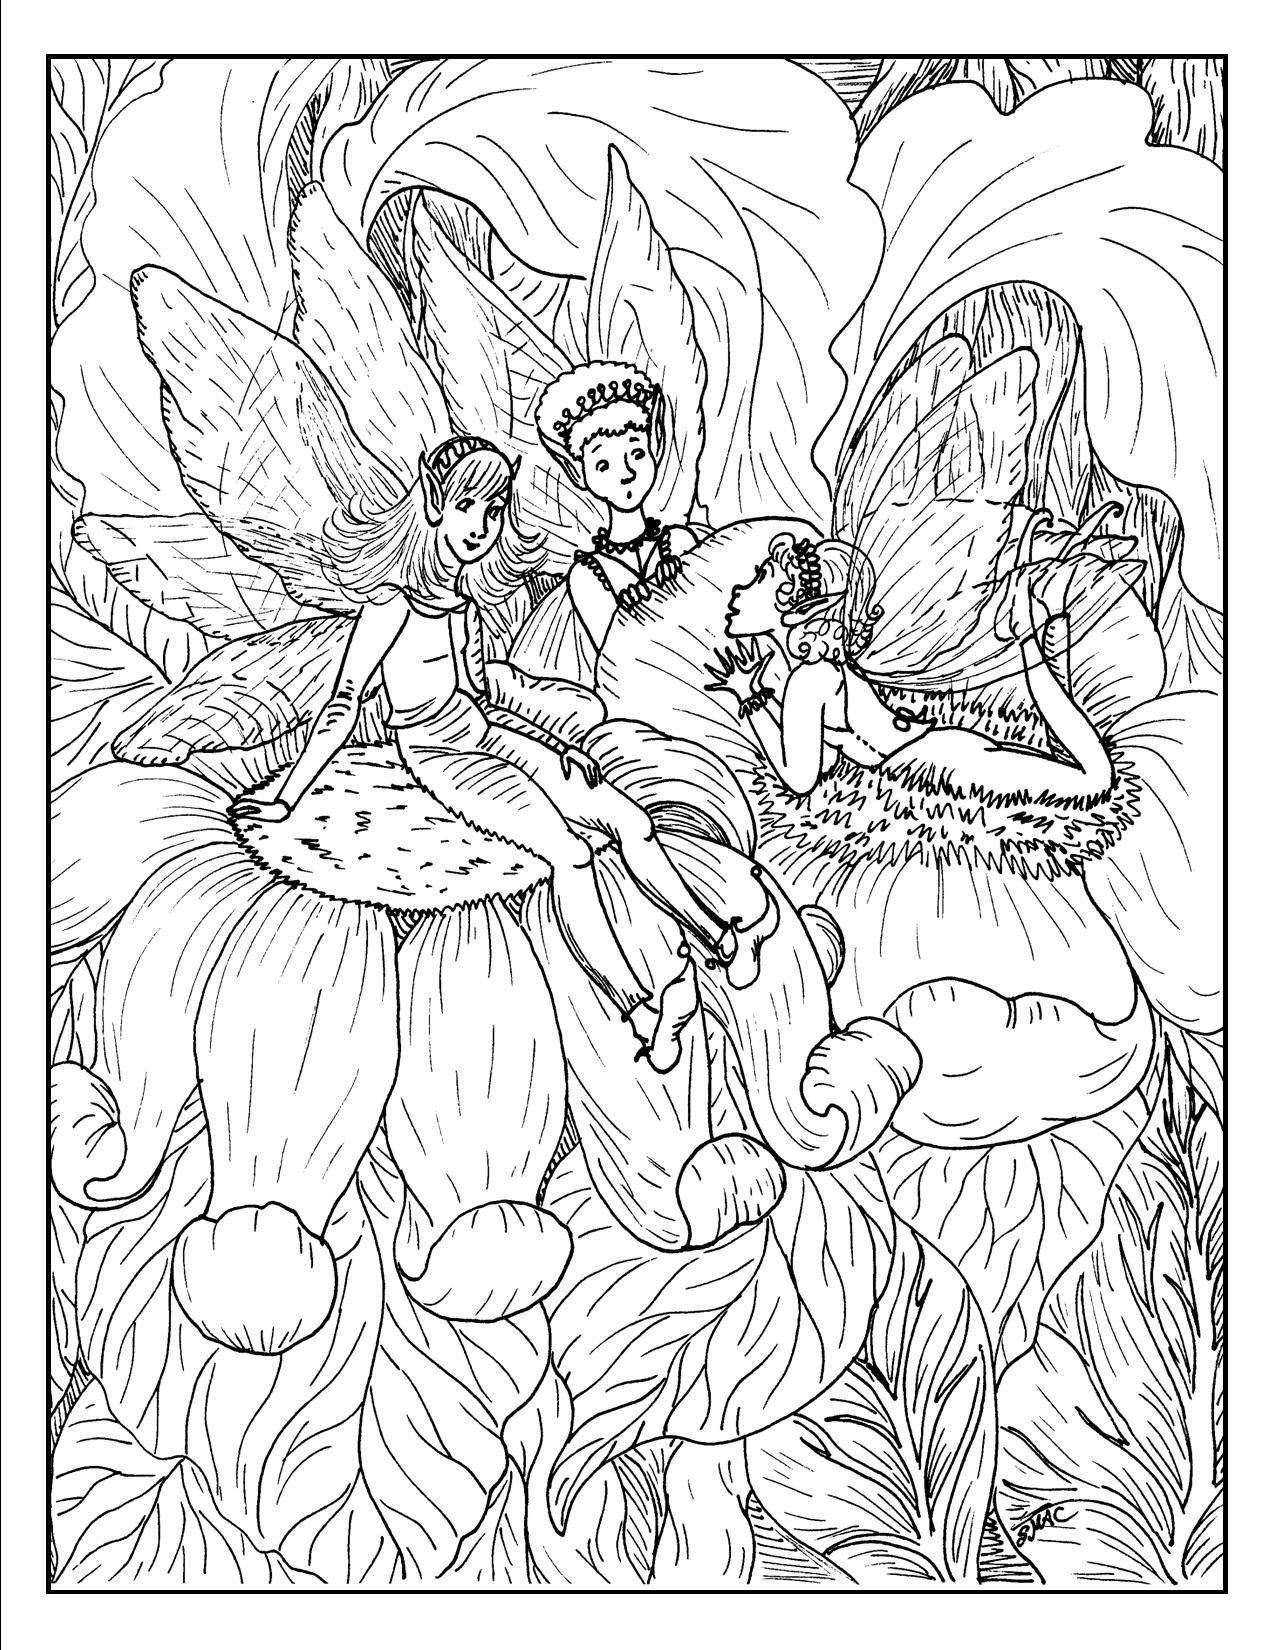 Fantasy Coloring Pages For Adults To Download And Print For Free ...